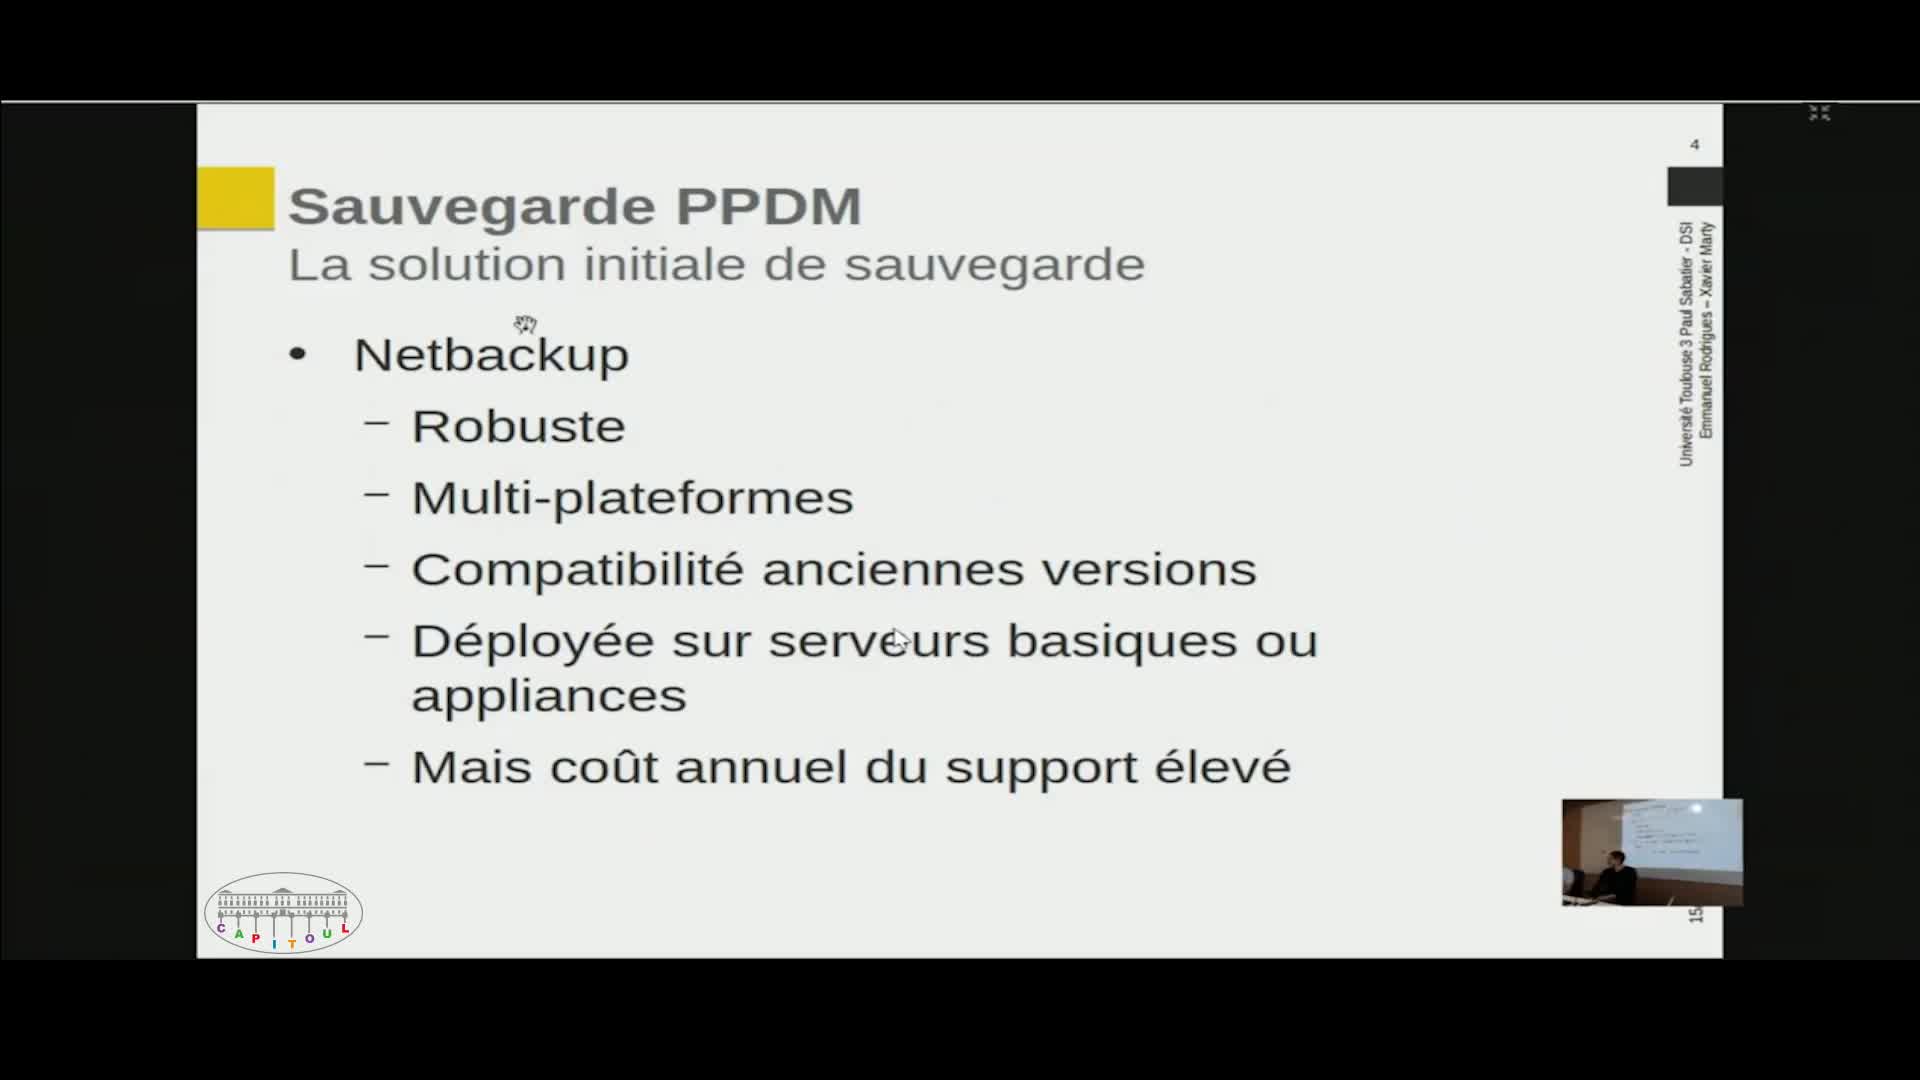 Sauvegarde et archivage - Sauvegarde Dell PPDM (power Protect Data Manager)